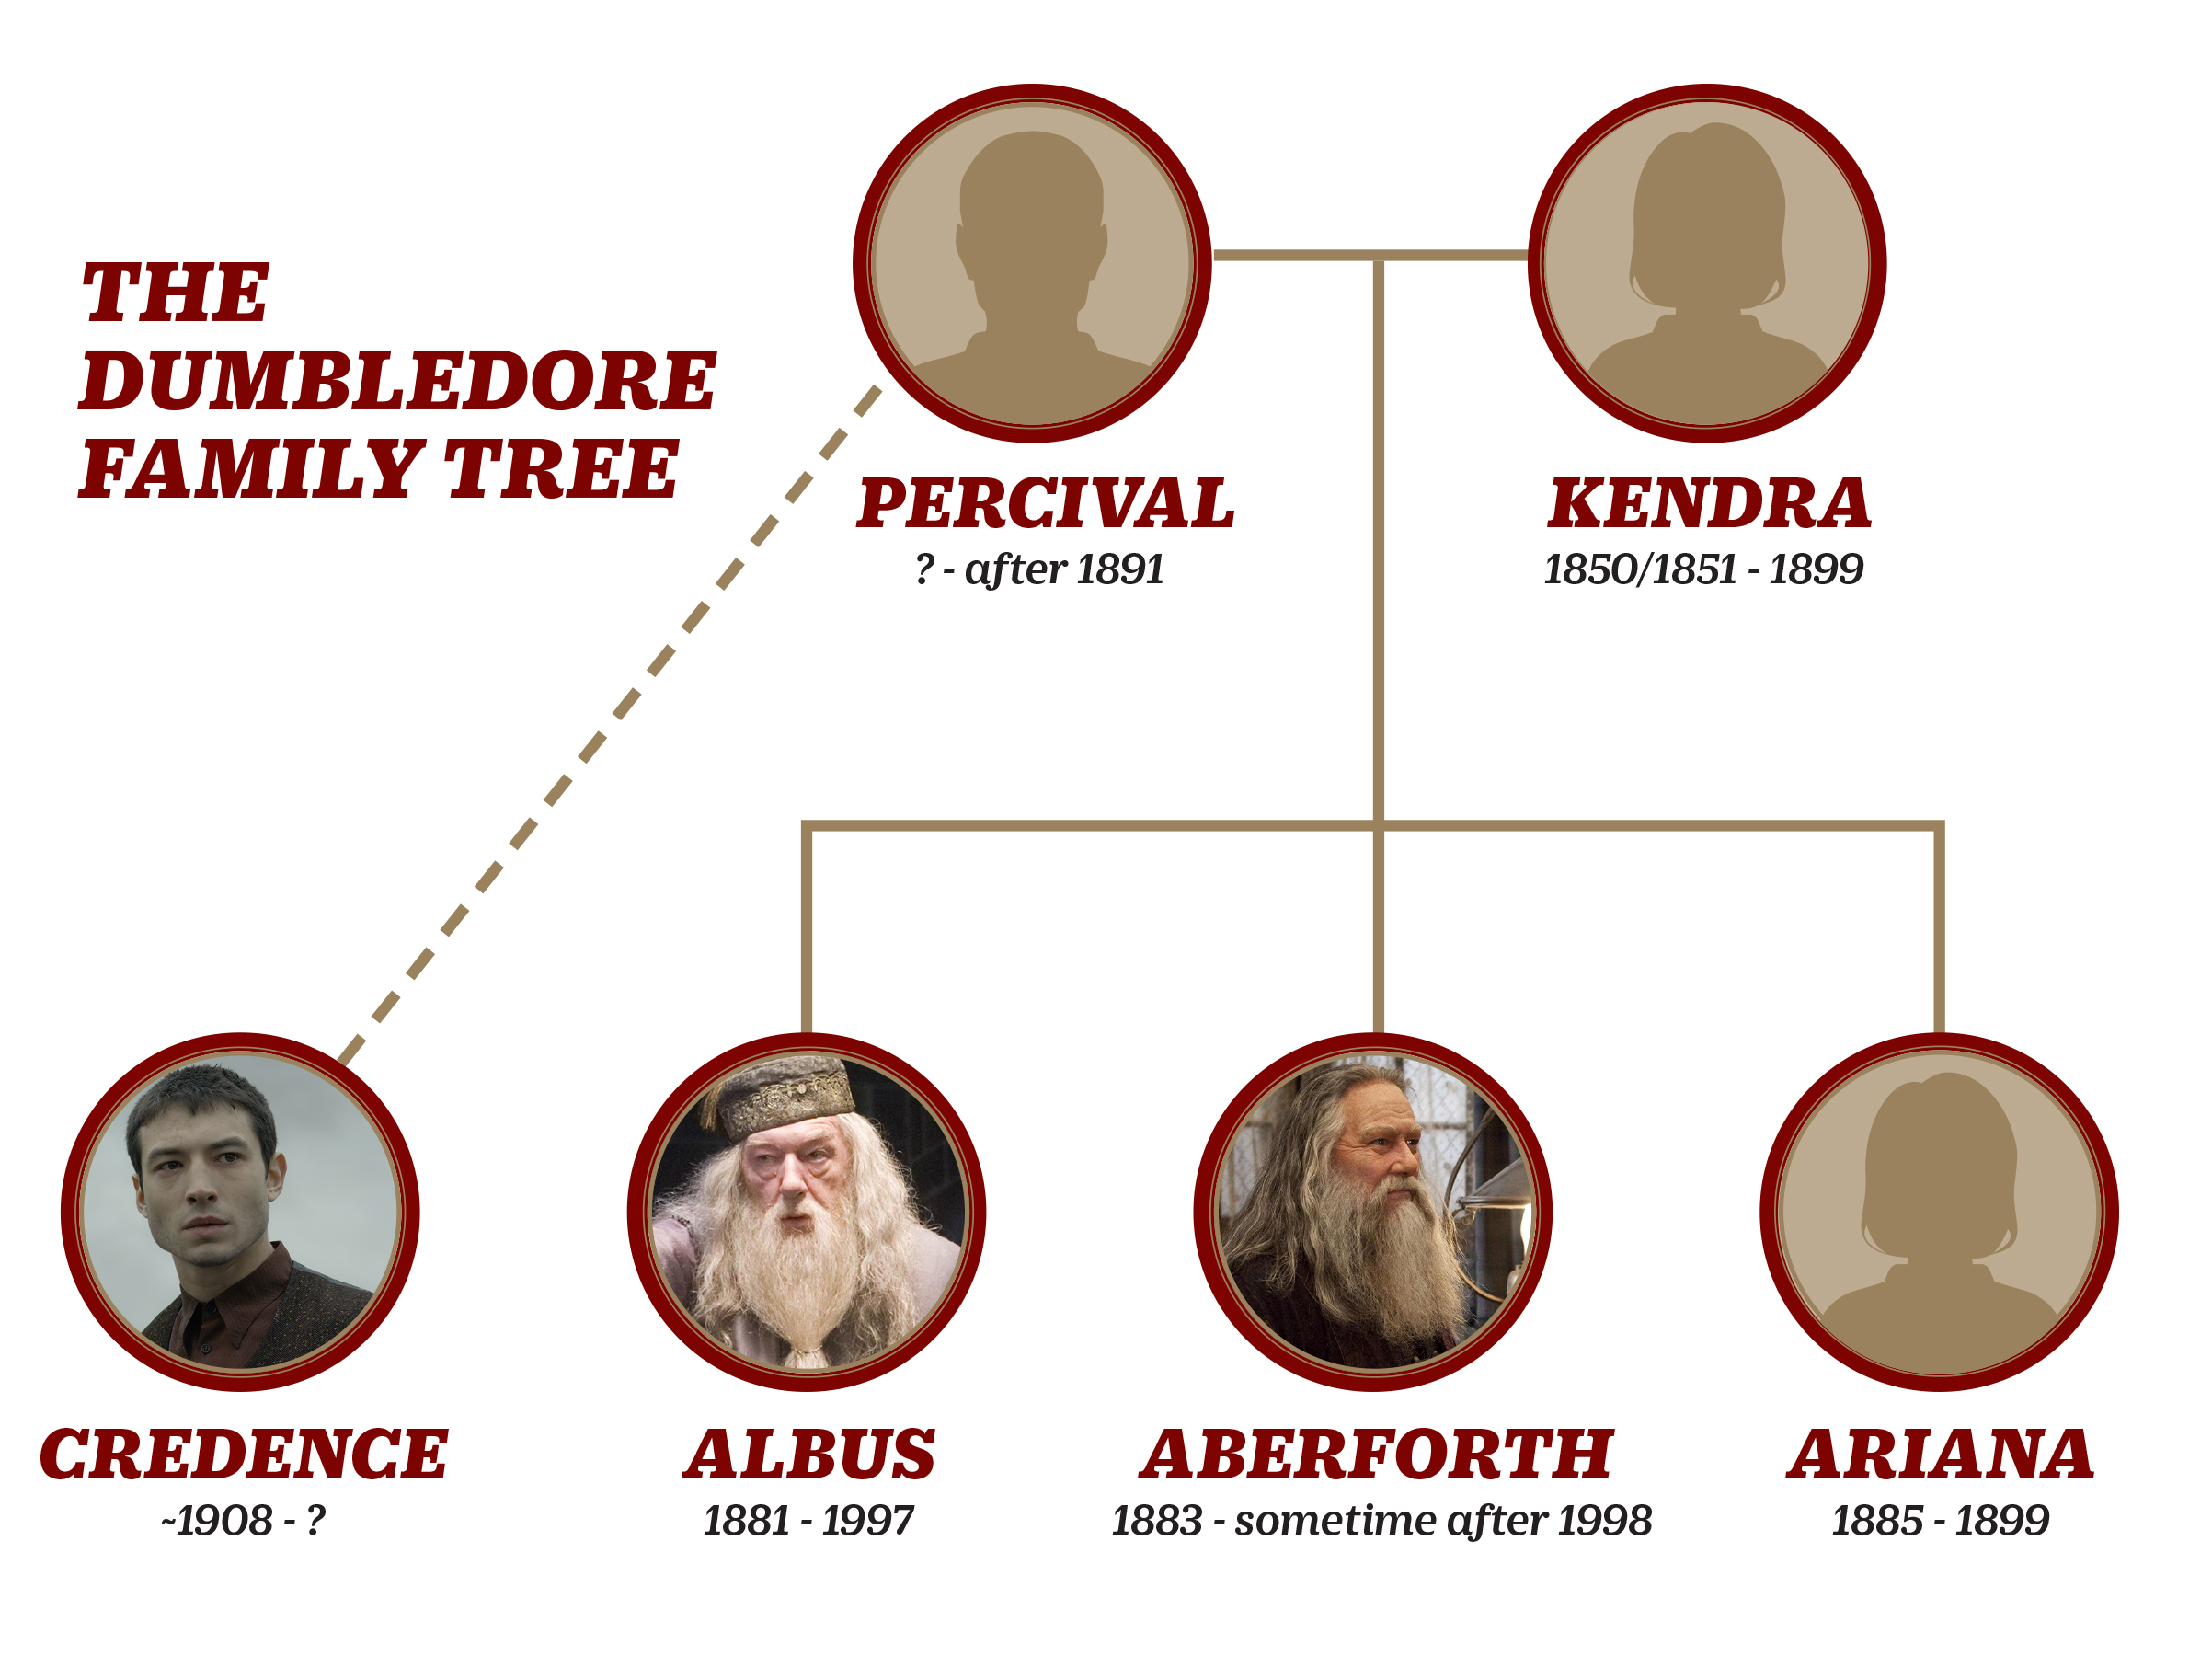 What are the traits of Albus Dumbledore's brother? 2